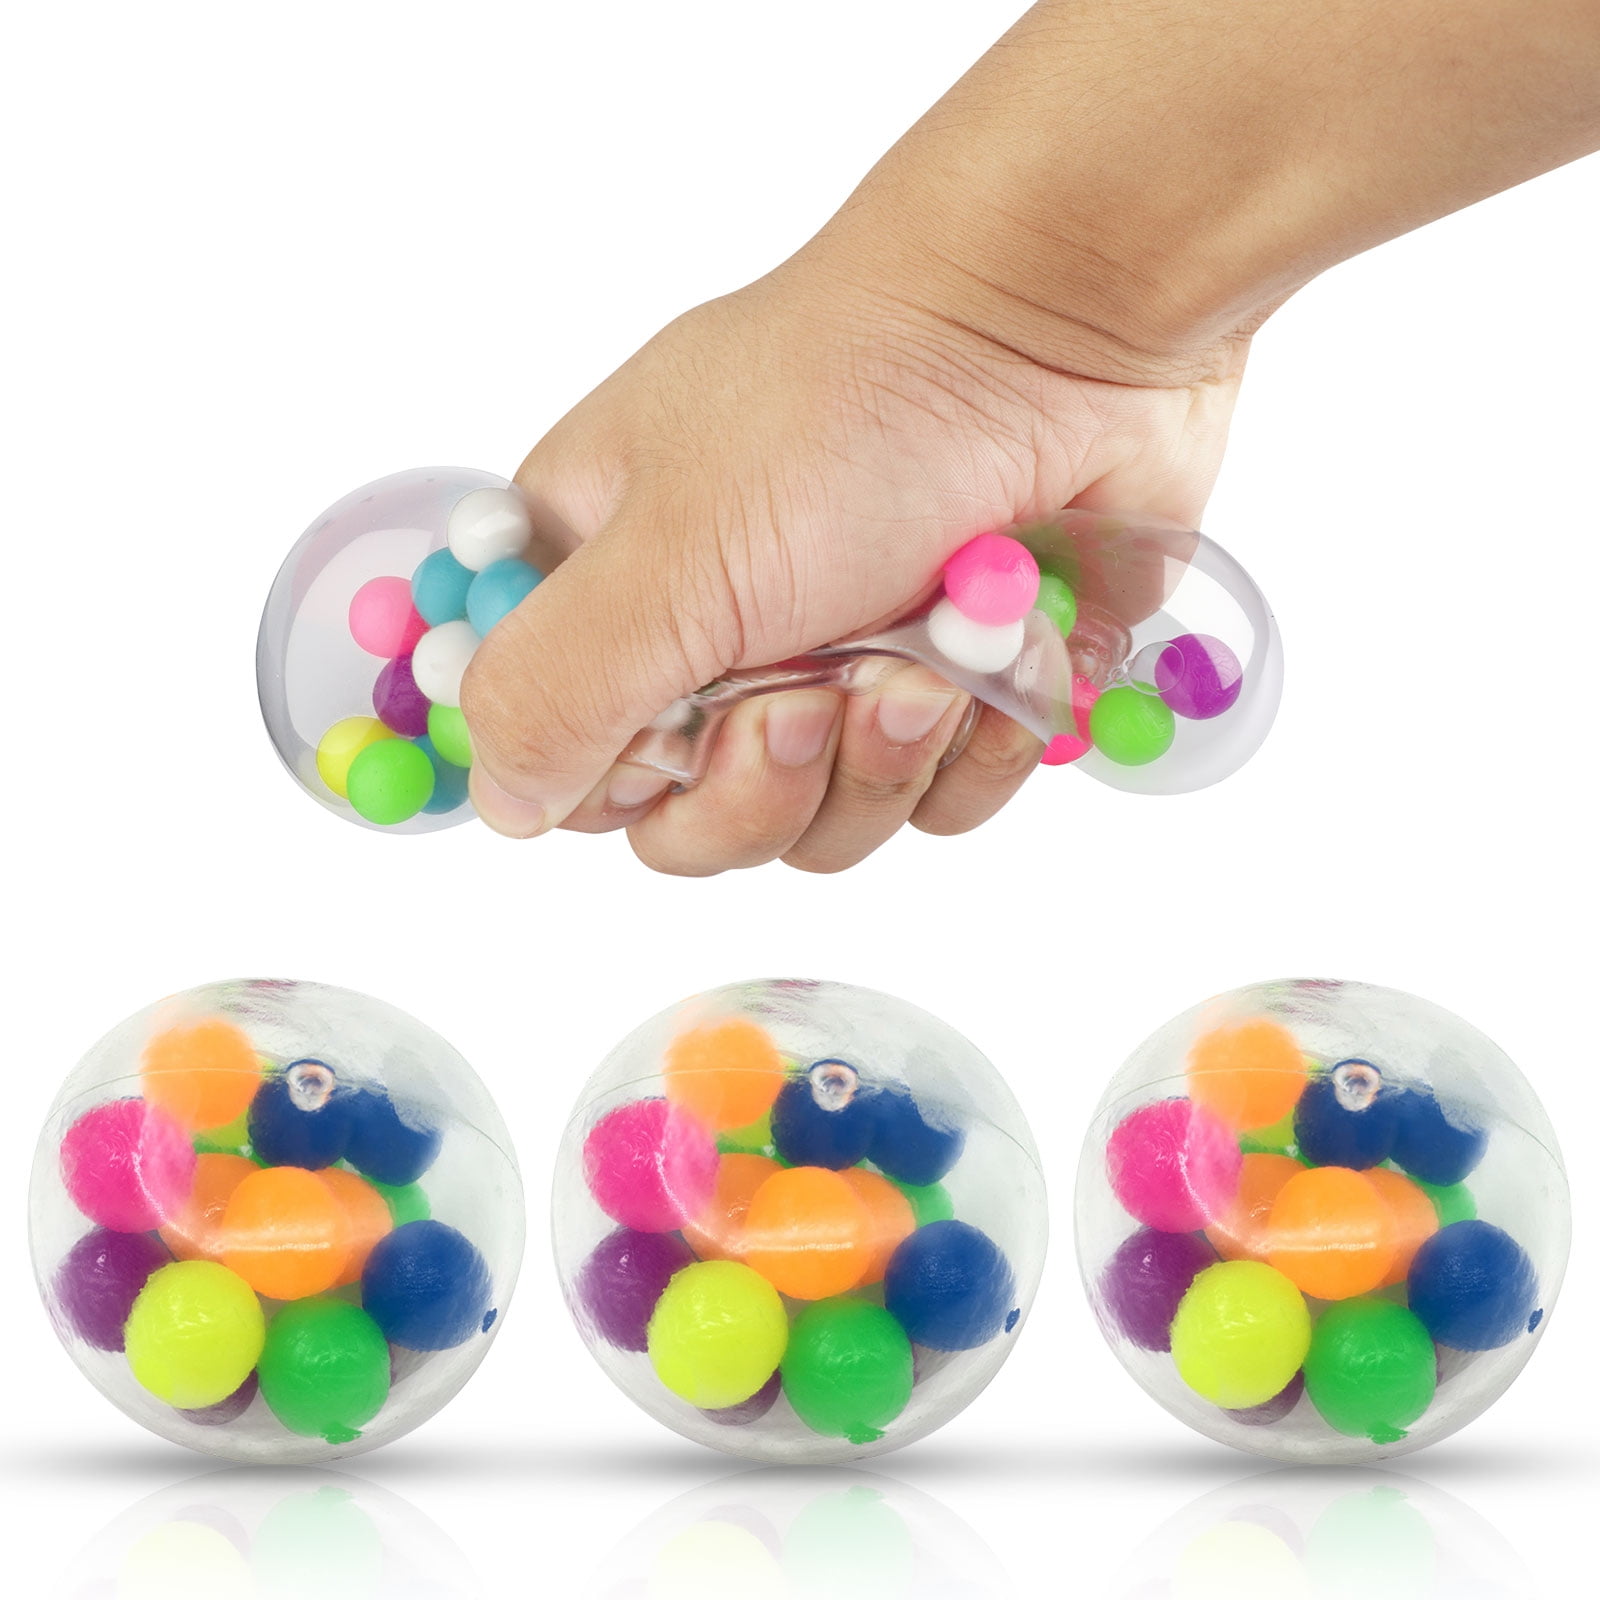 Novel Squishy Mesh Abreact Ball Squeeze Anti Stress Toy For Kids Play Gift UK 